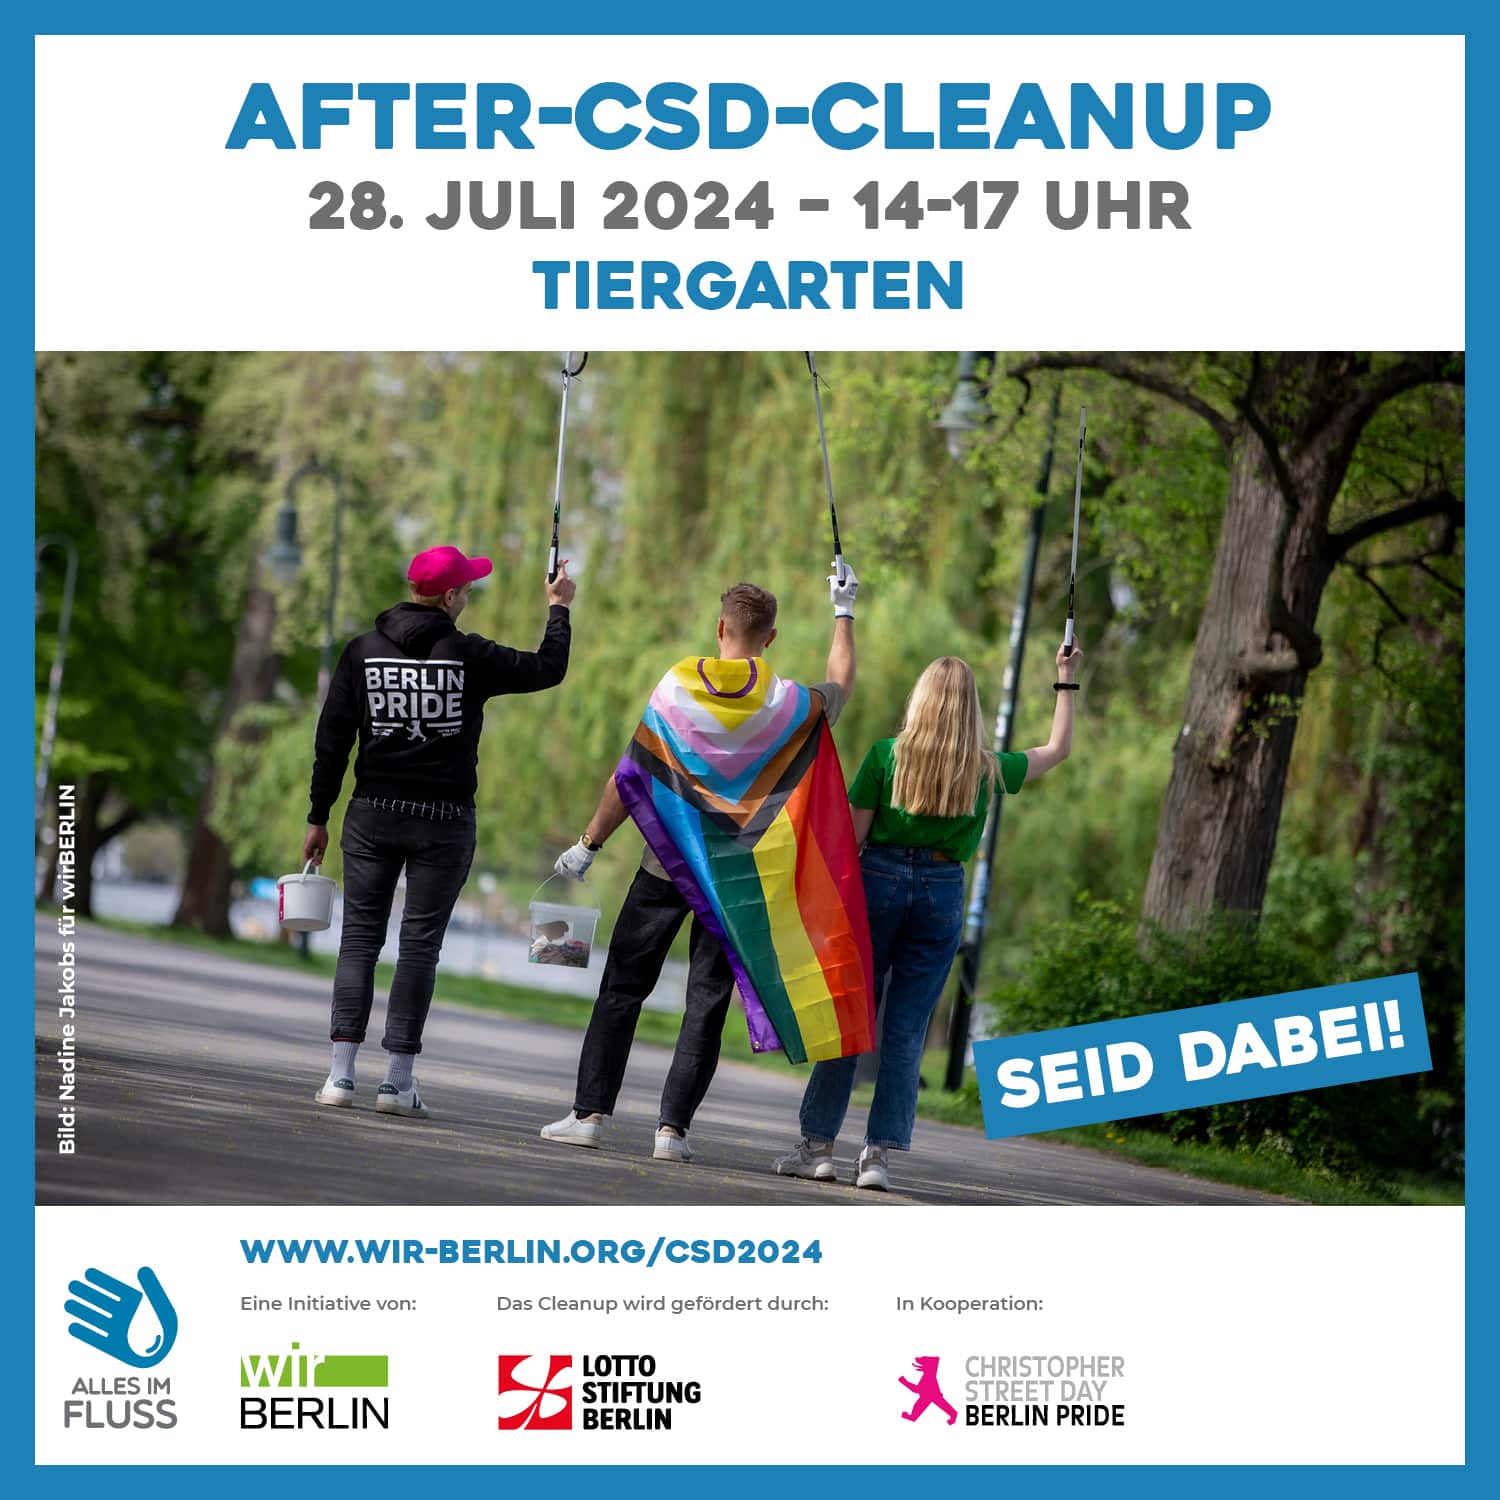 240526_AIF_After-CSD-Cleanup